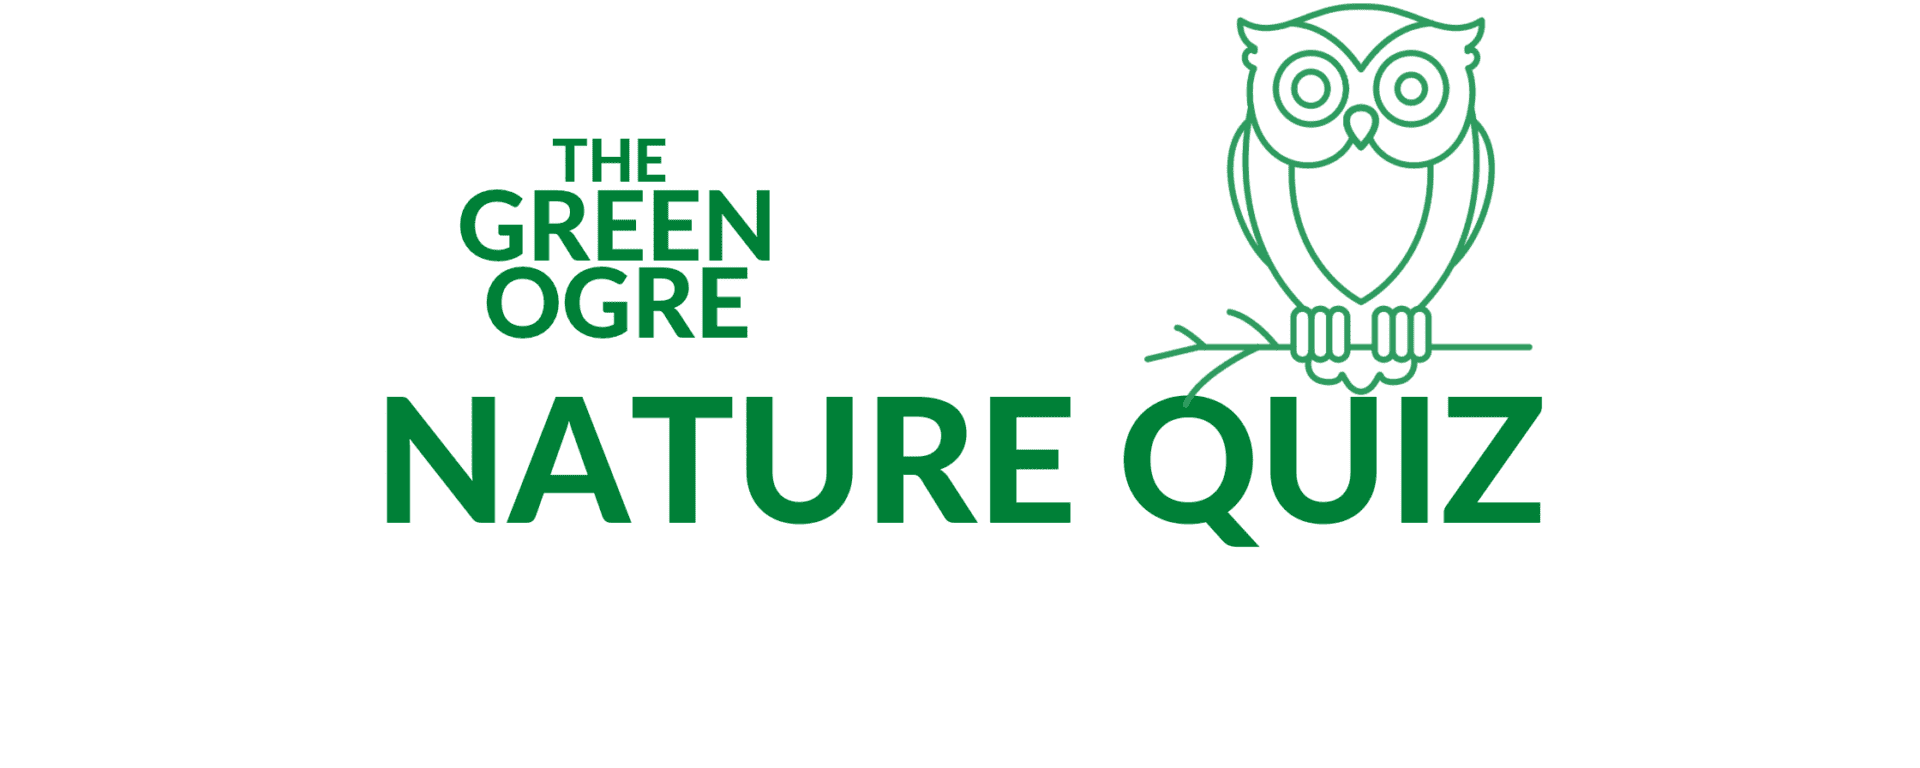 The Green Ogre Nature Quiz is for nature enthusiasts who love quizzing